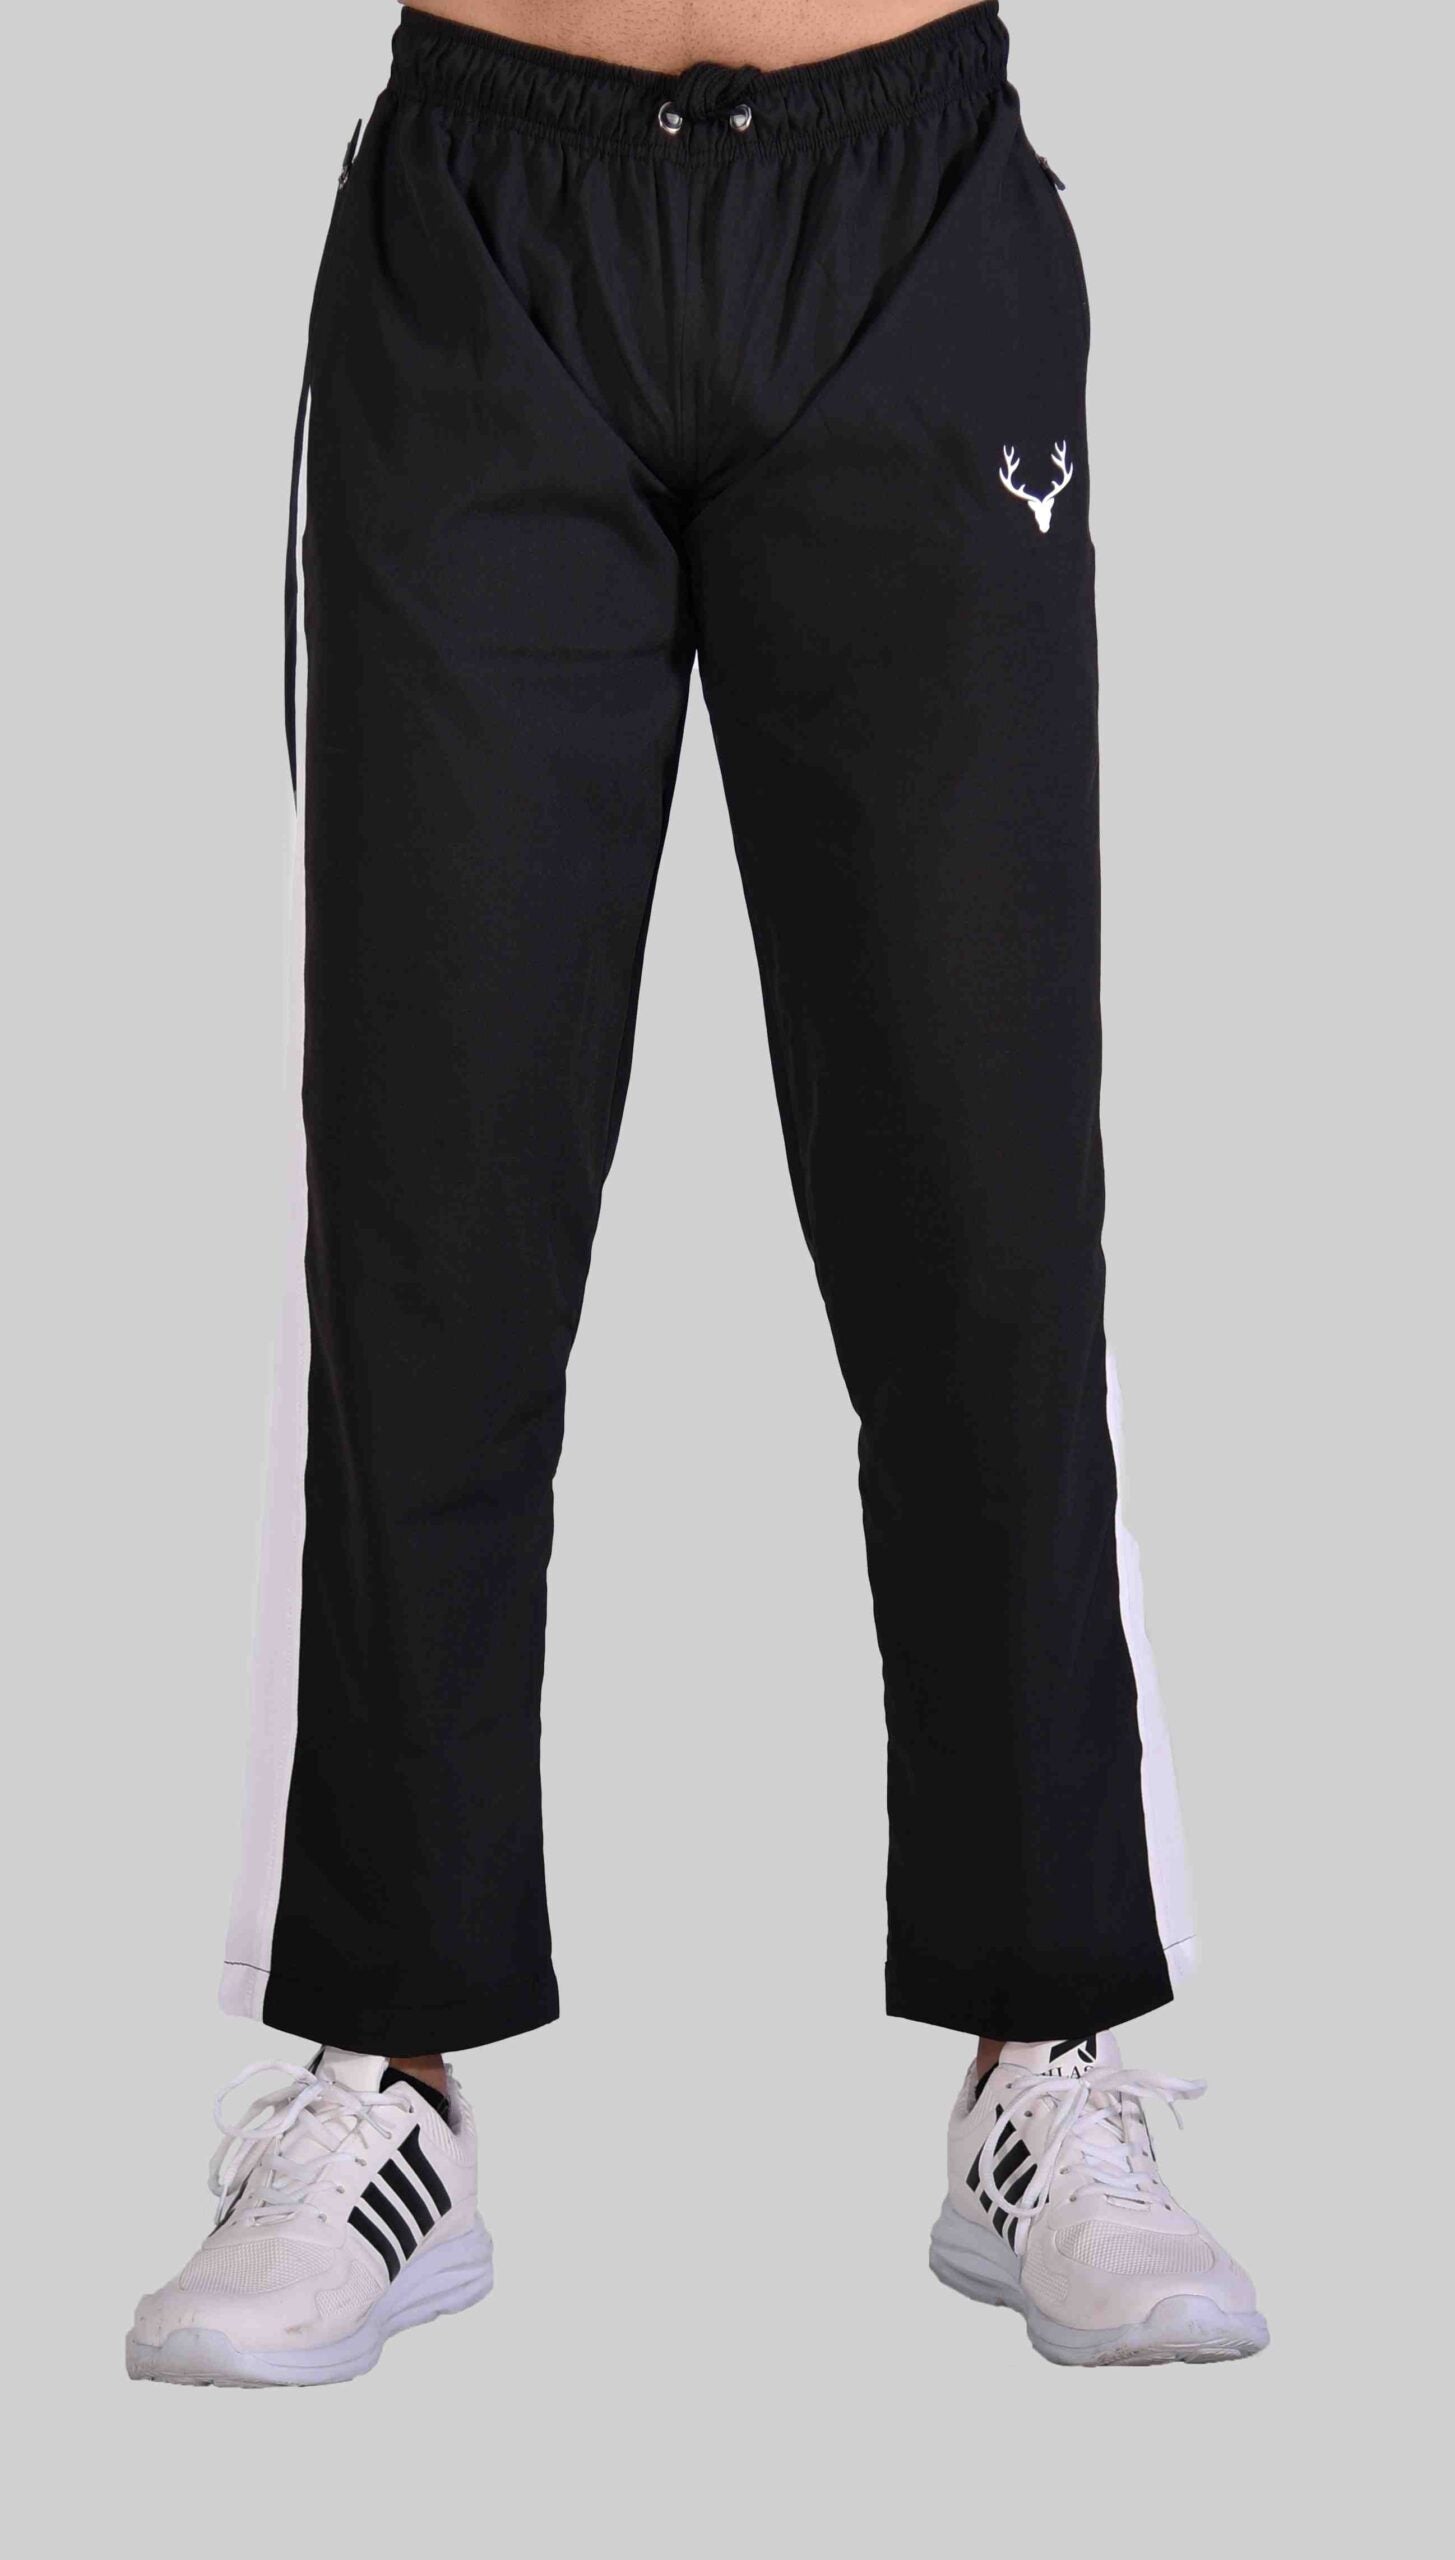 SG Loose Fit Trouser 1.0 (Black & White) - Stag Clothing